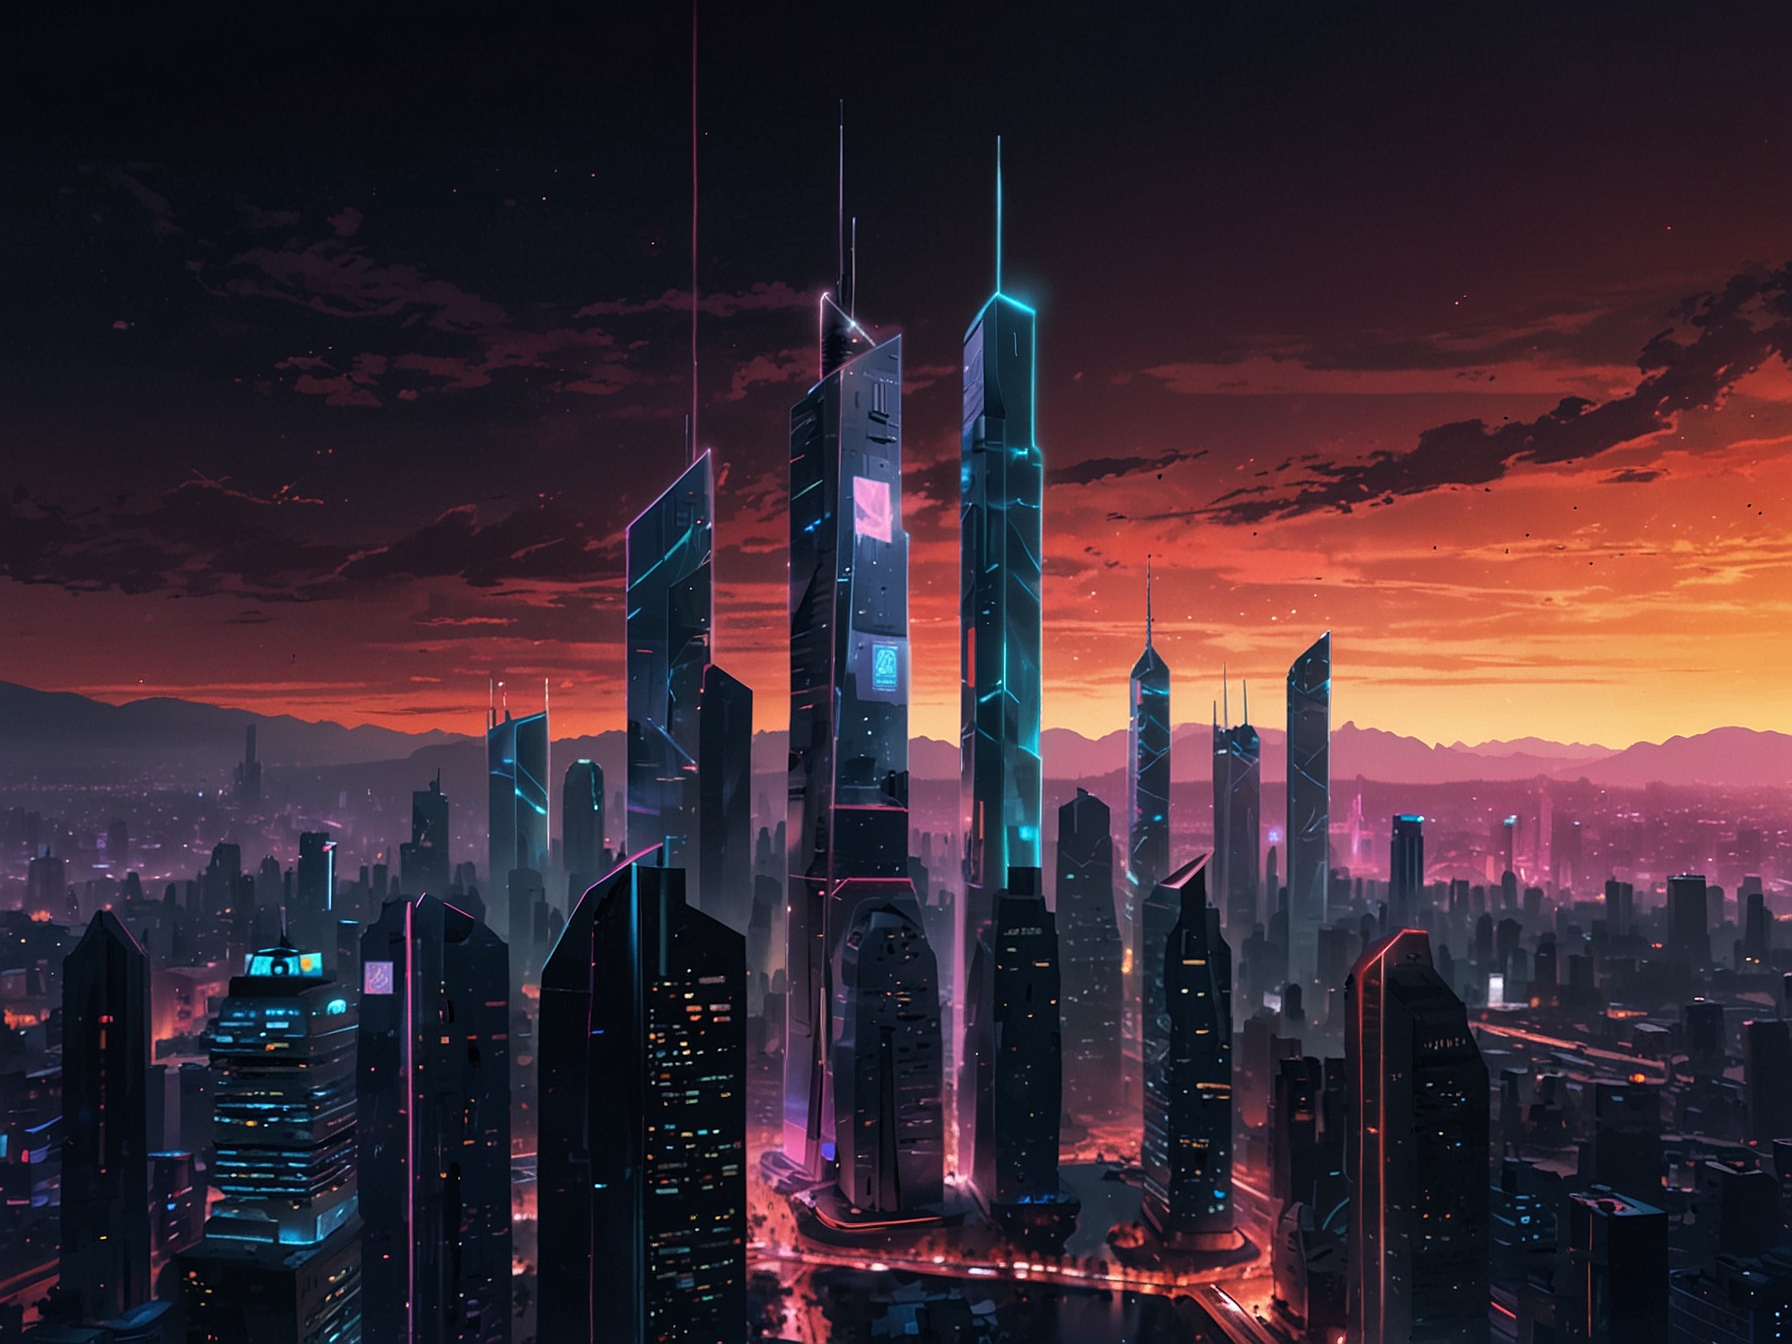 A high-tech futuristic cityscape with neon lights and towering skyscrapers. This visual represents the technologically saturated world of 'Neuromancer' that Apple TV+ aims to bring to life.